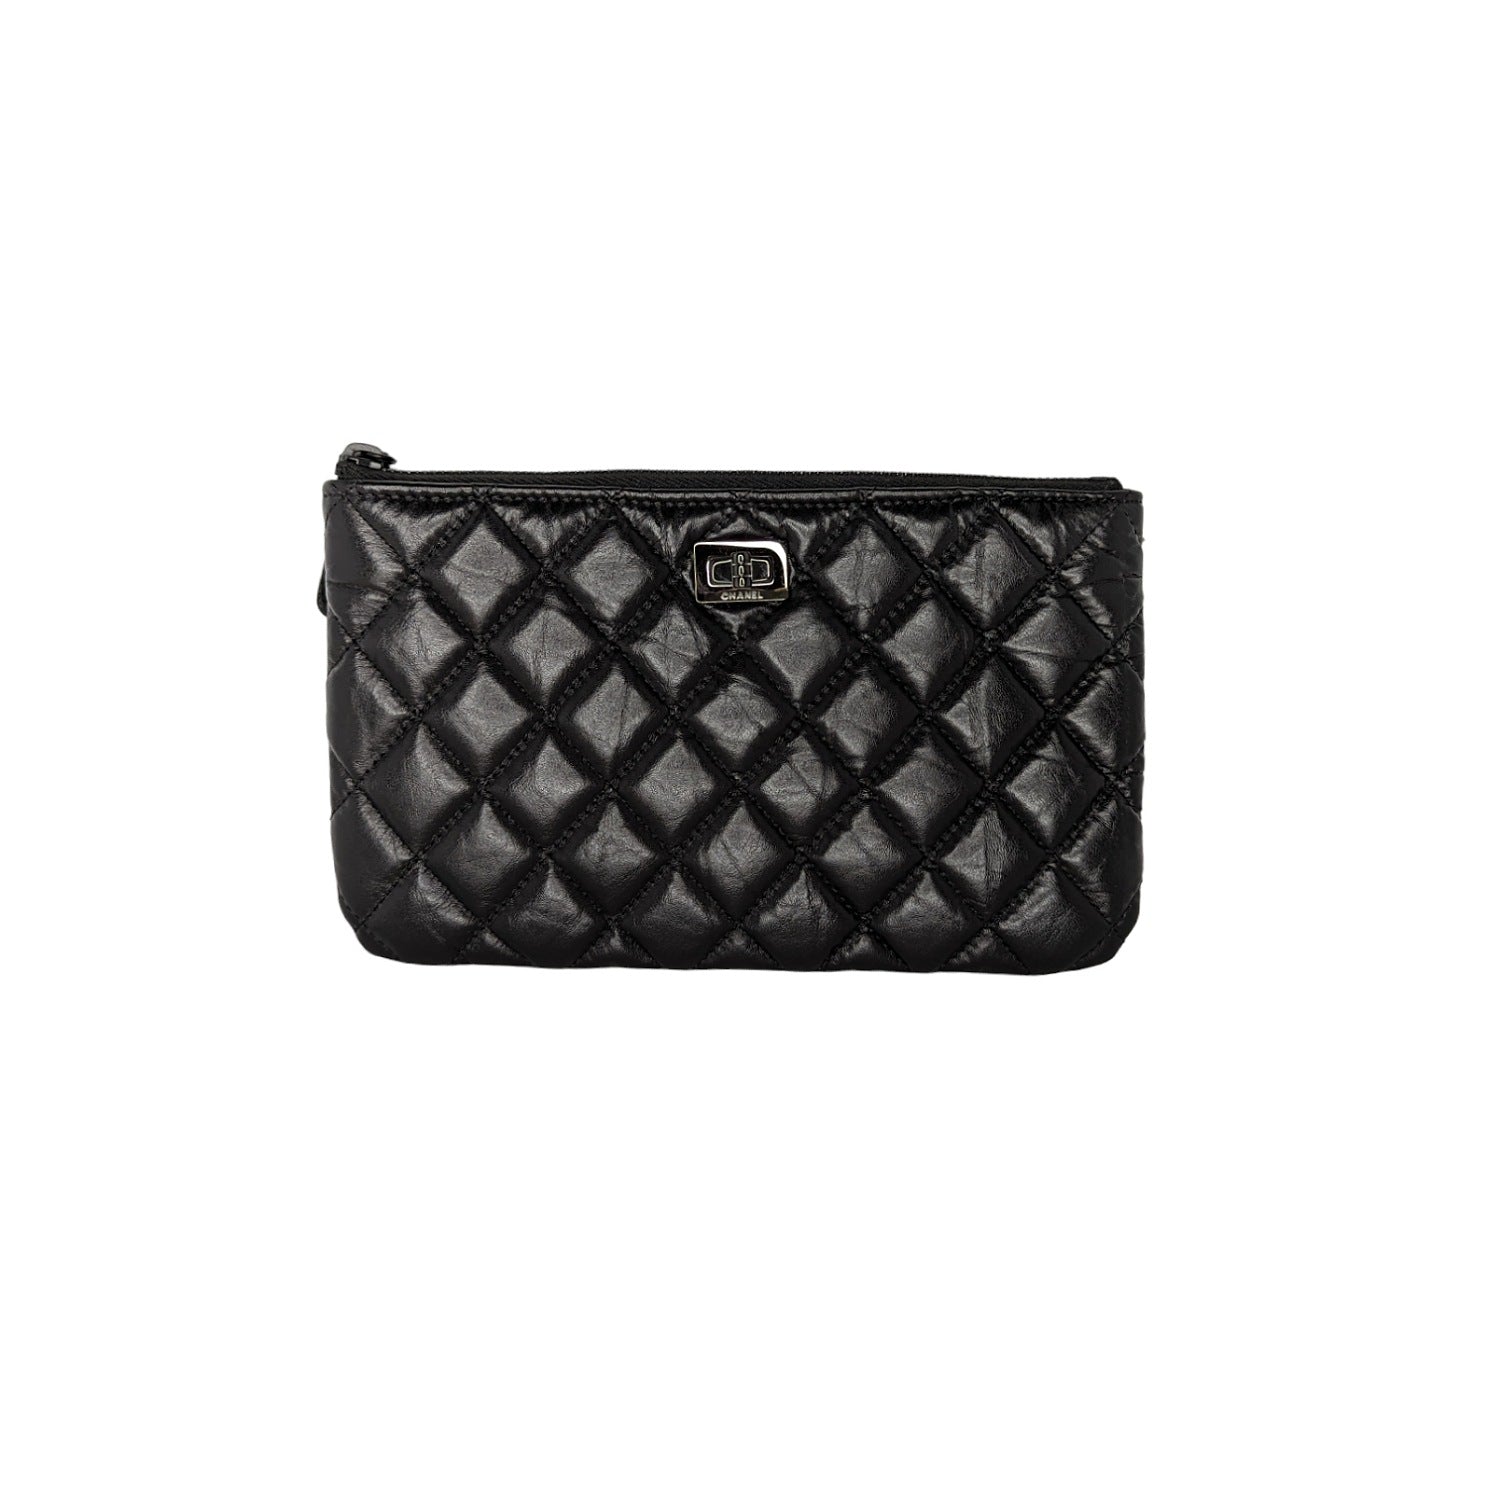 Chanel Black Quilted Leather Reissue 2.55 Zip Flap Card Holder at